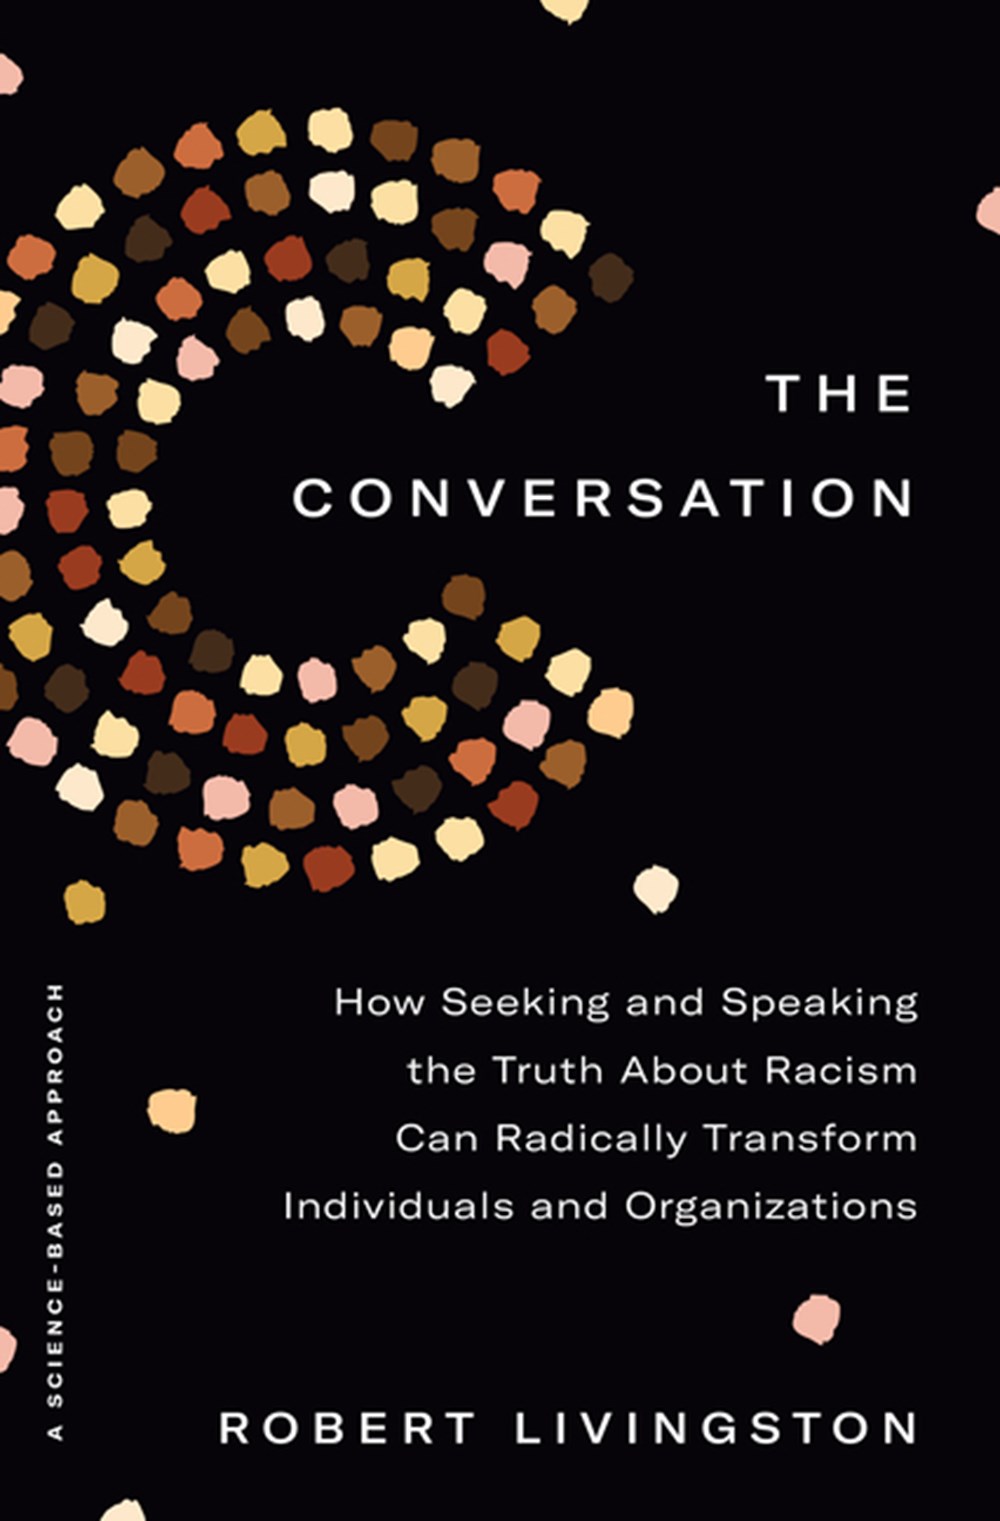 Conversation How Seeking and Speaking the Truth about Racism Can Radically Transform Individuals and